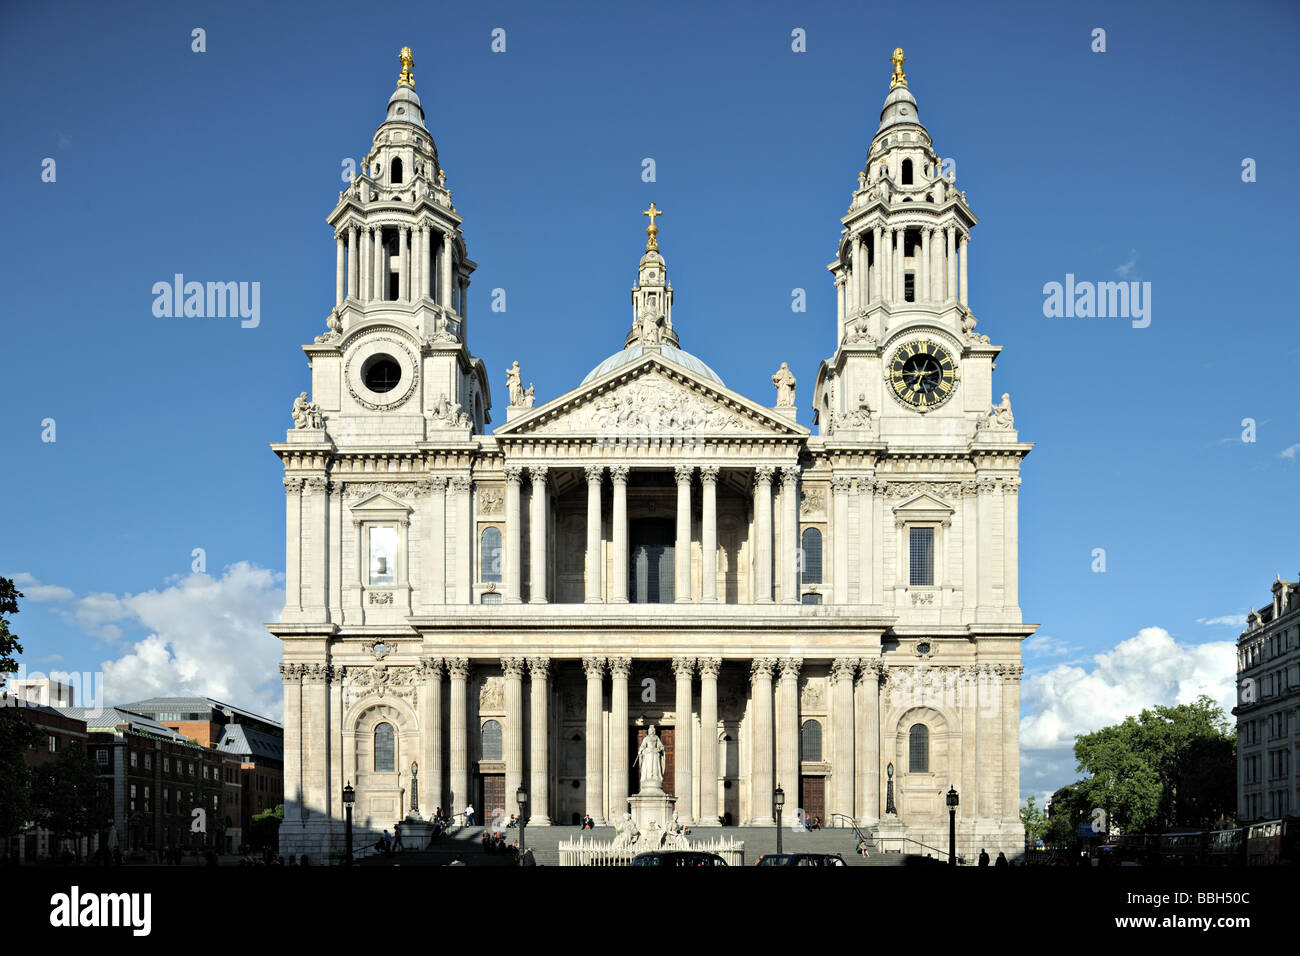 West facade of St Pauls Cathedral City of London England UK one of the largest in the world in early evening light Stock Photo